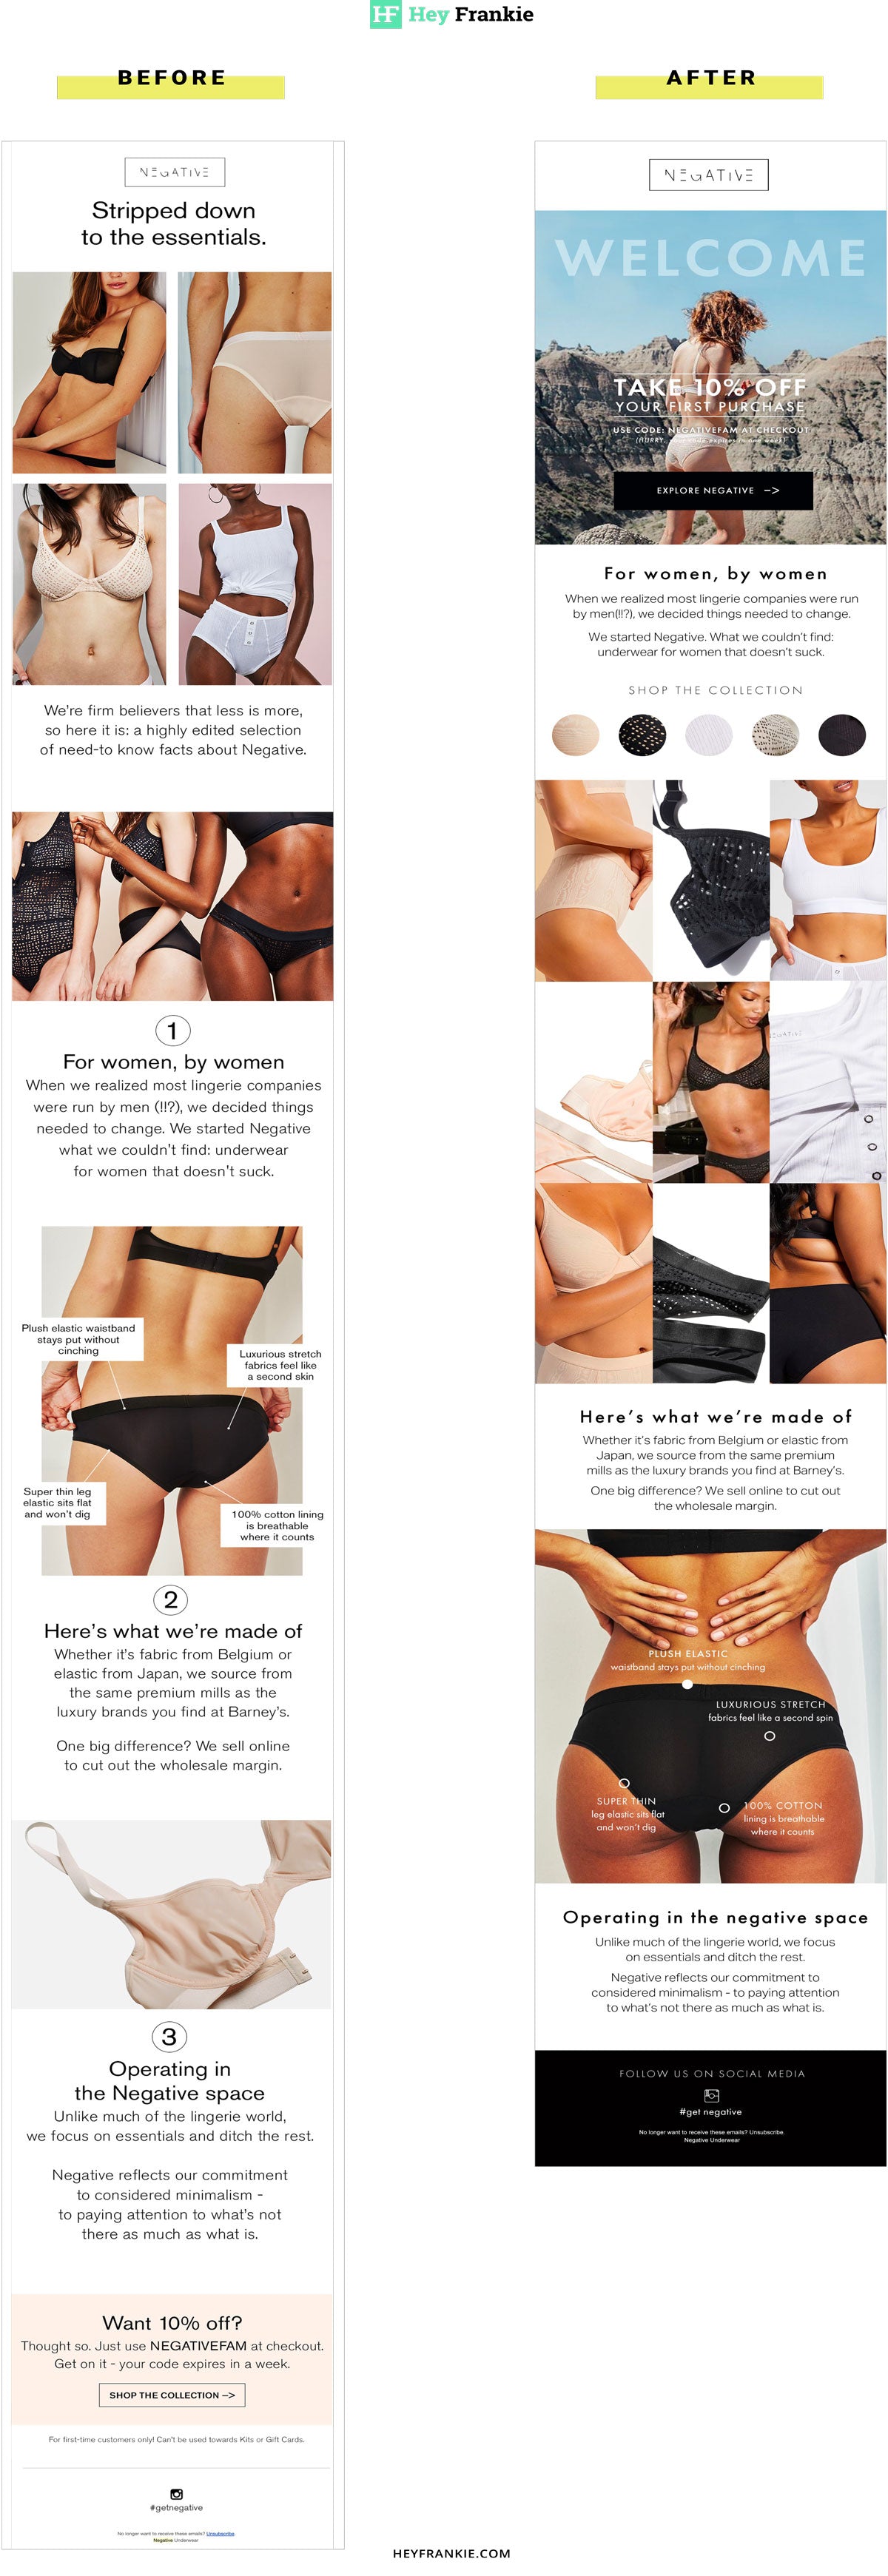 Negative Underwear - Product Information, Latest Updates, and